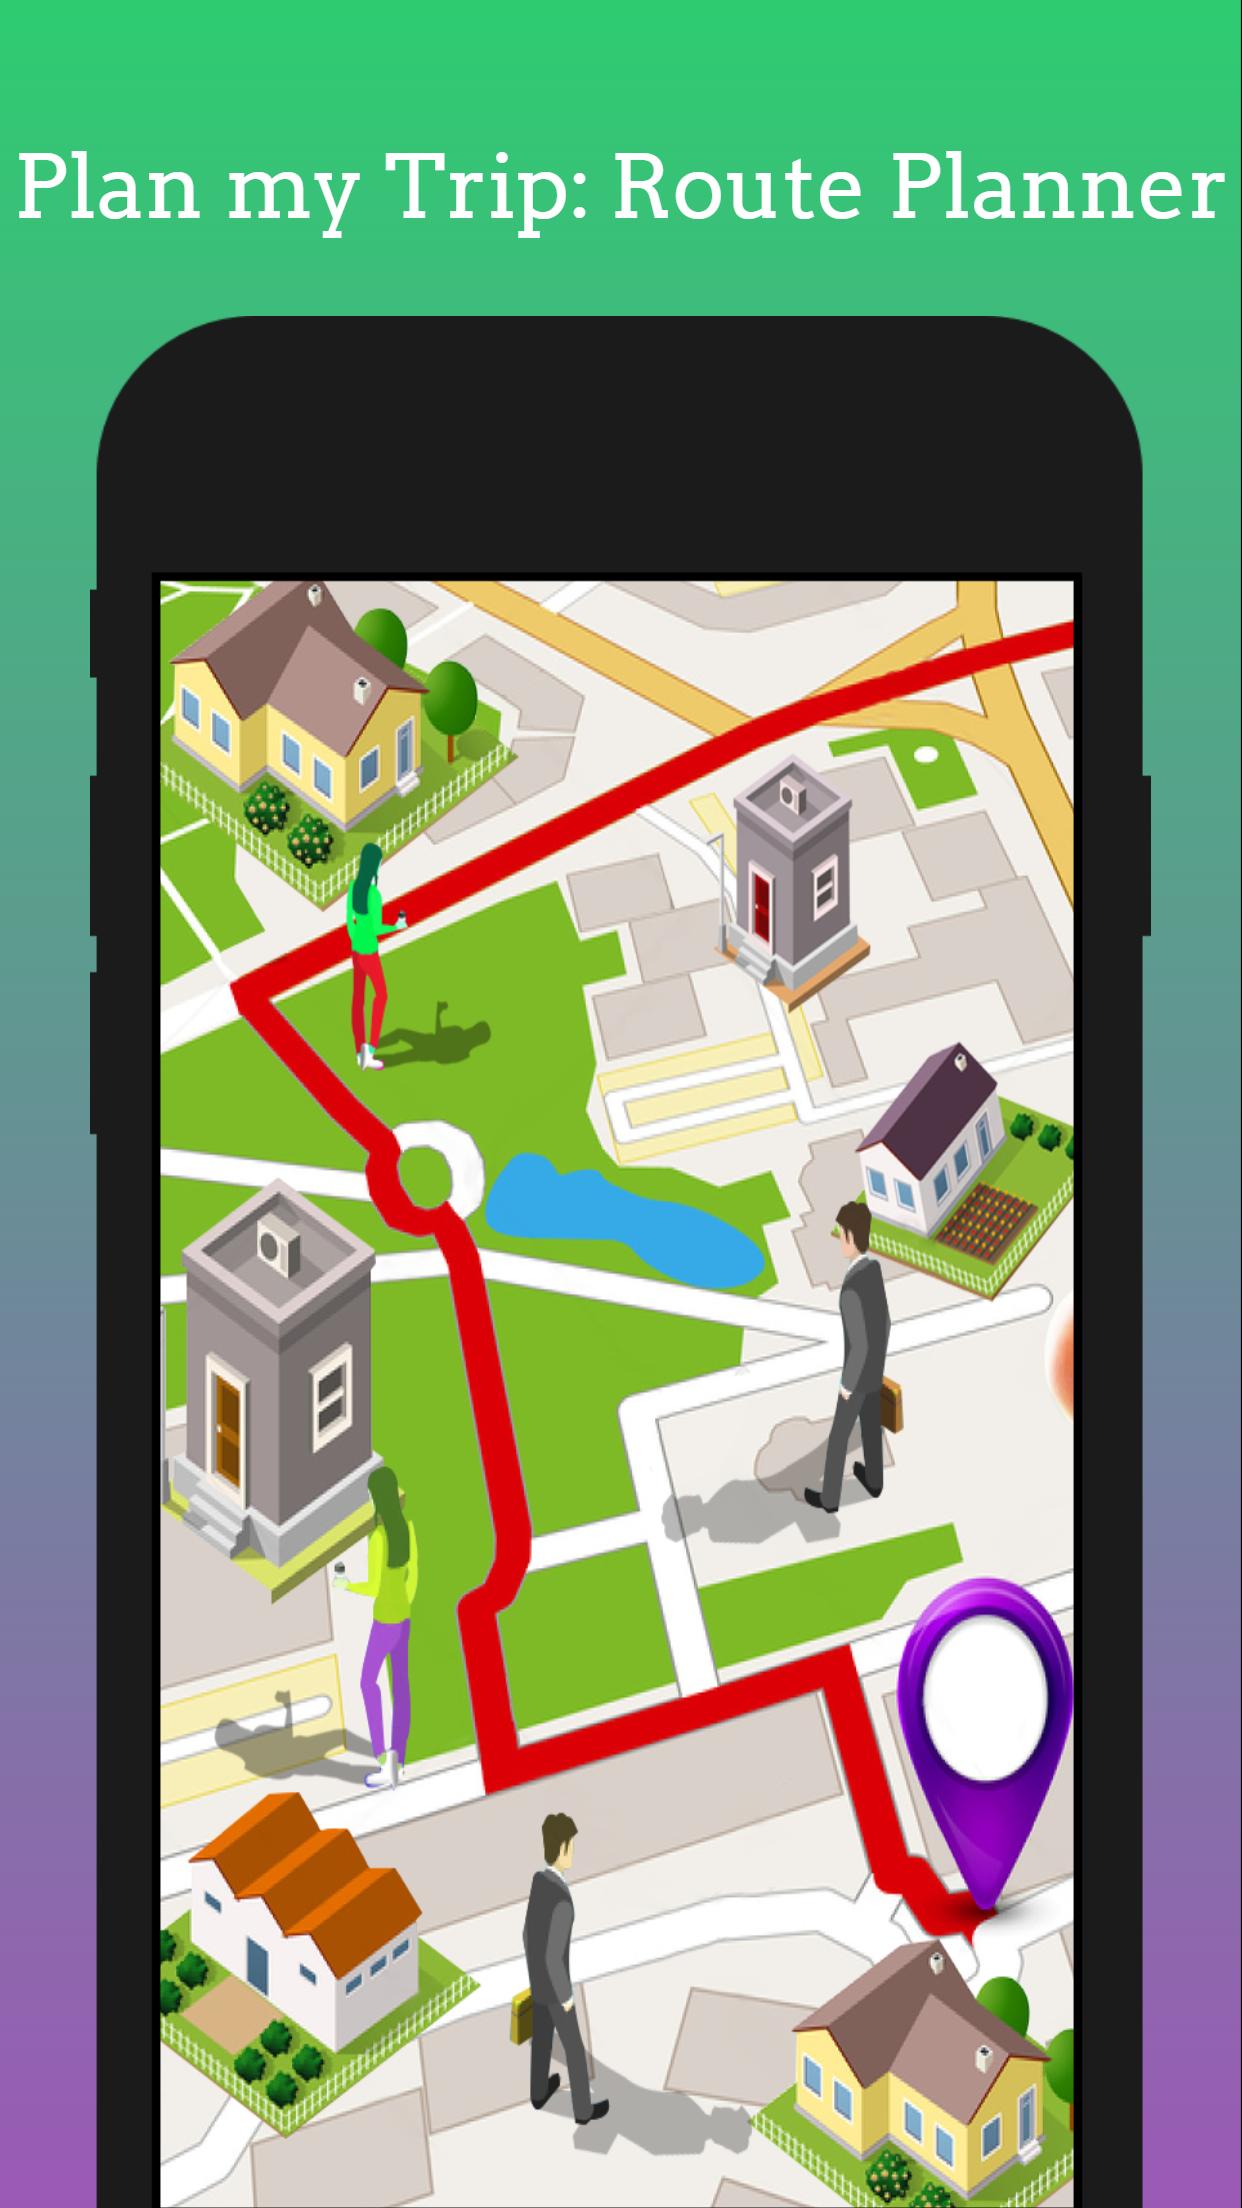 Plan my Trip: Route Planner for Android - APK Download